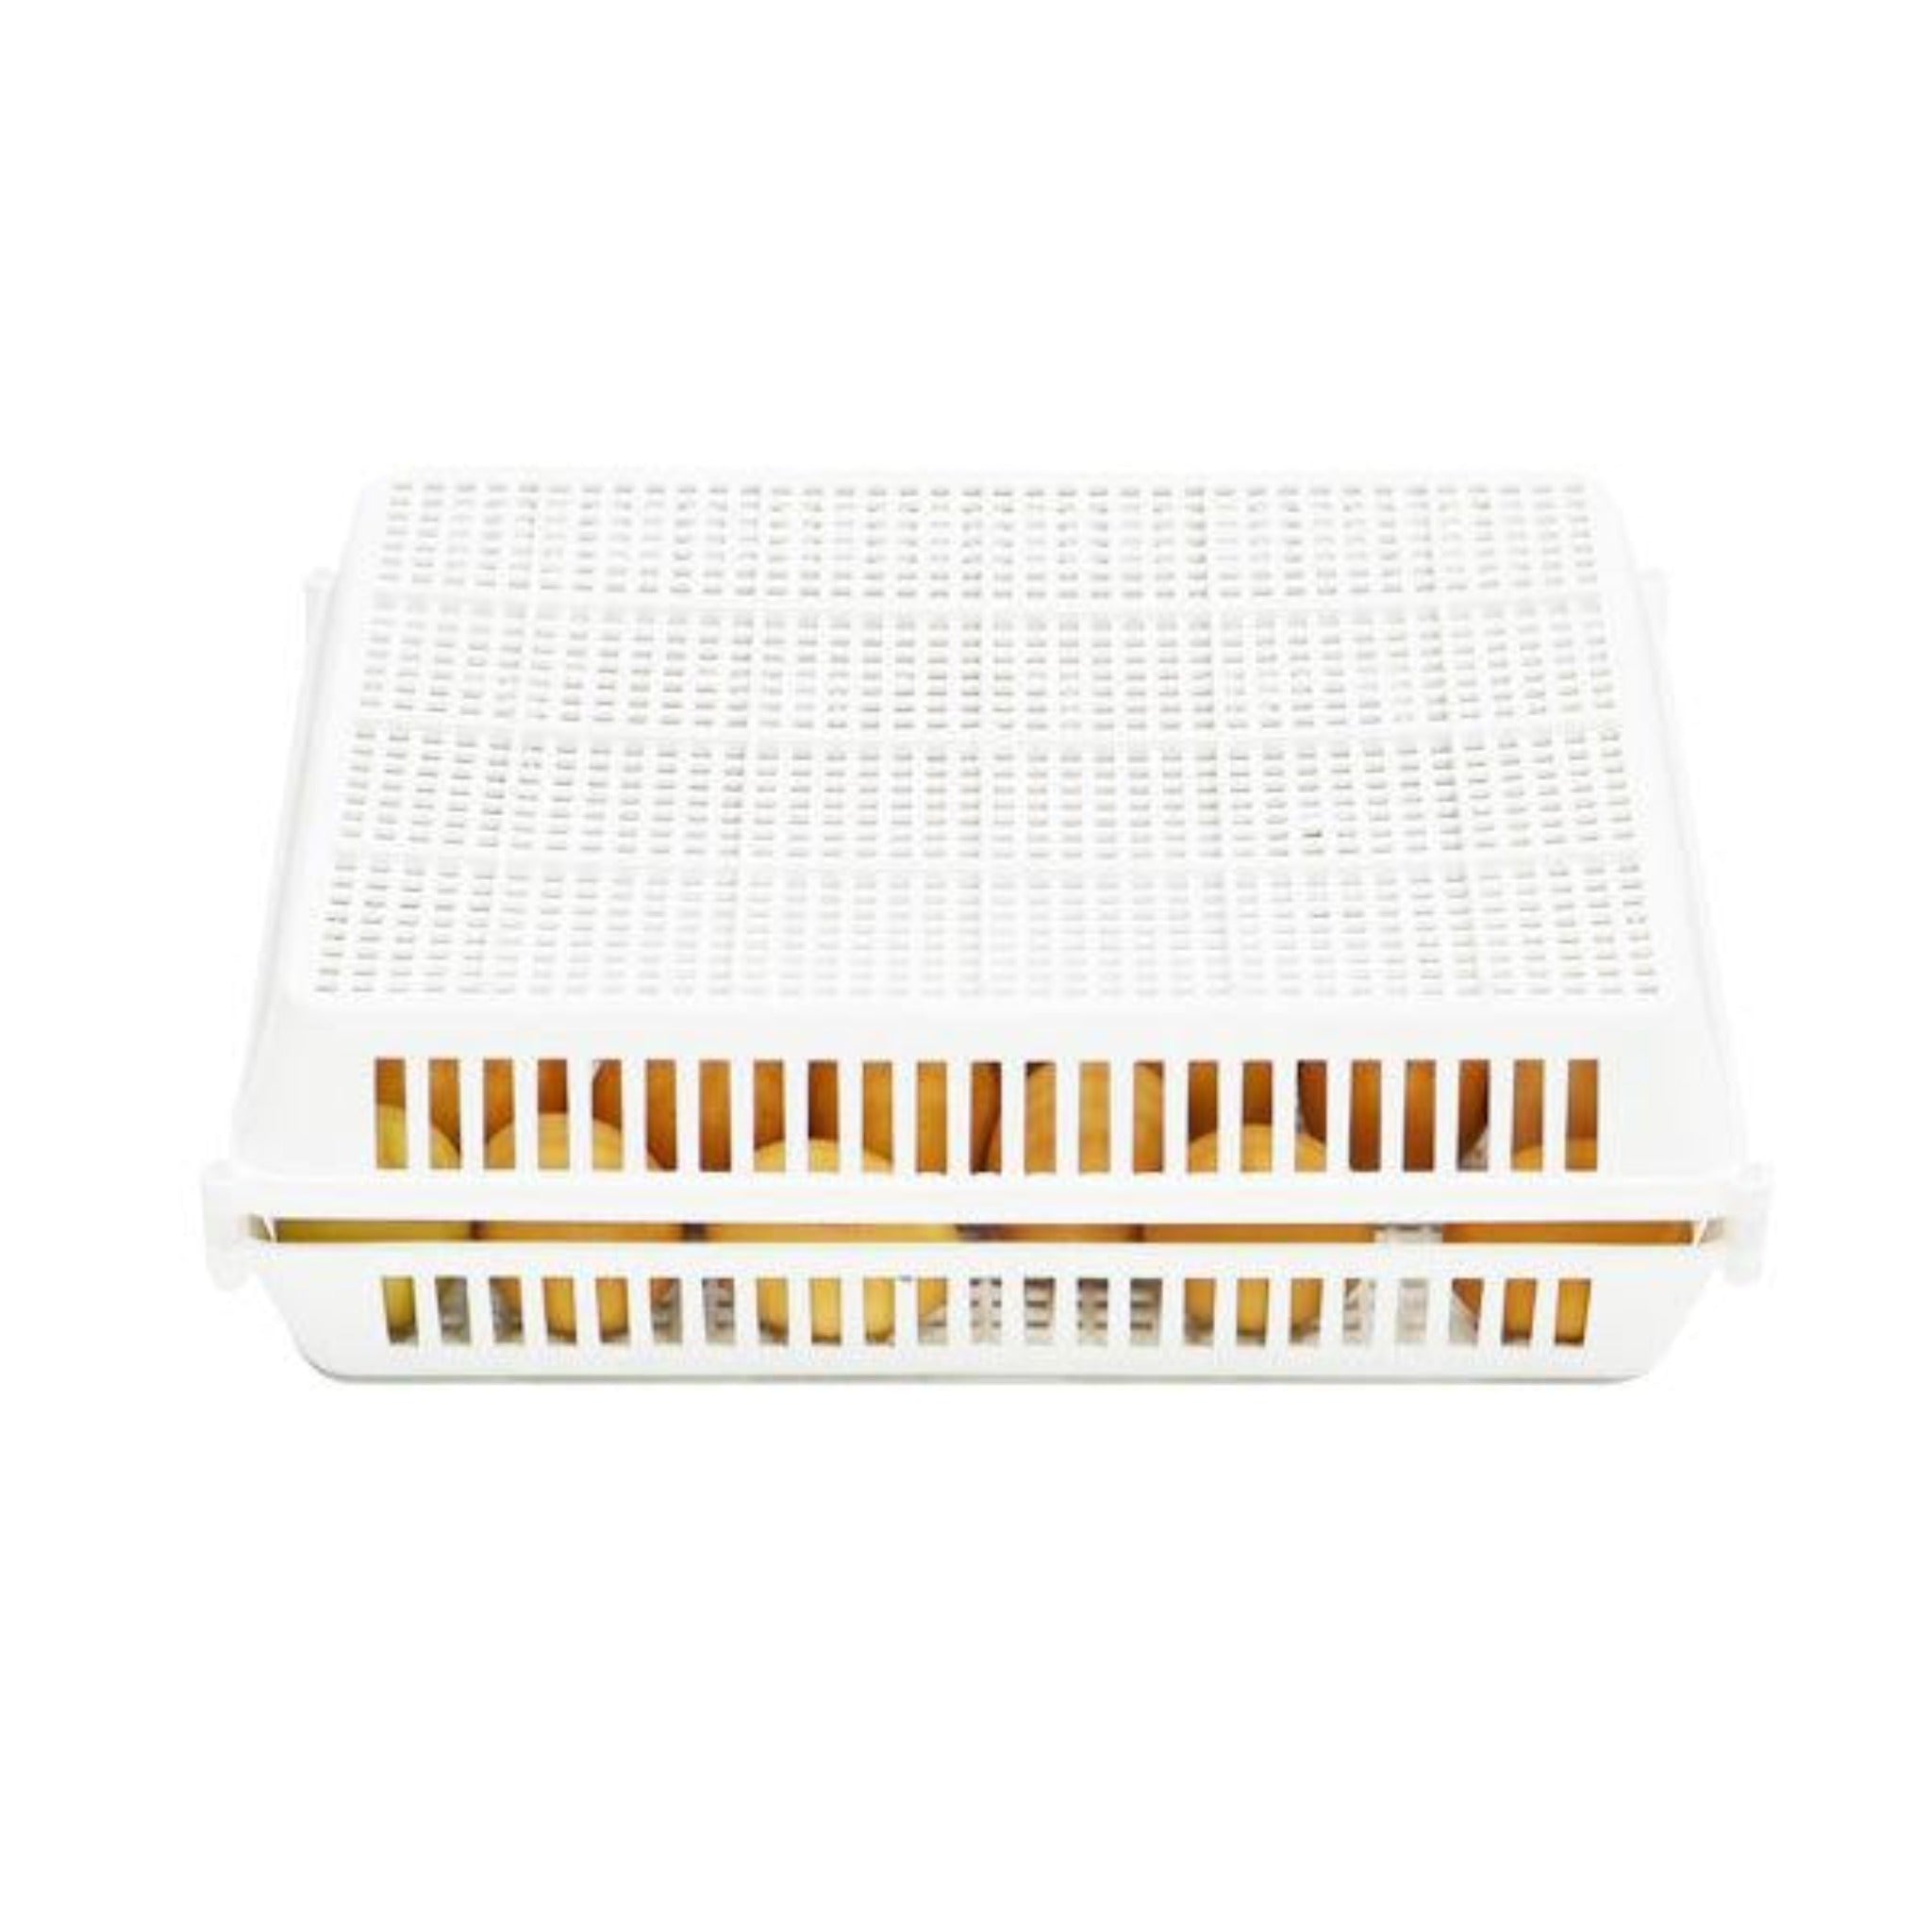 Conturn 180 Set - Automatic Egg Turners and Hatch Baskets